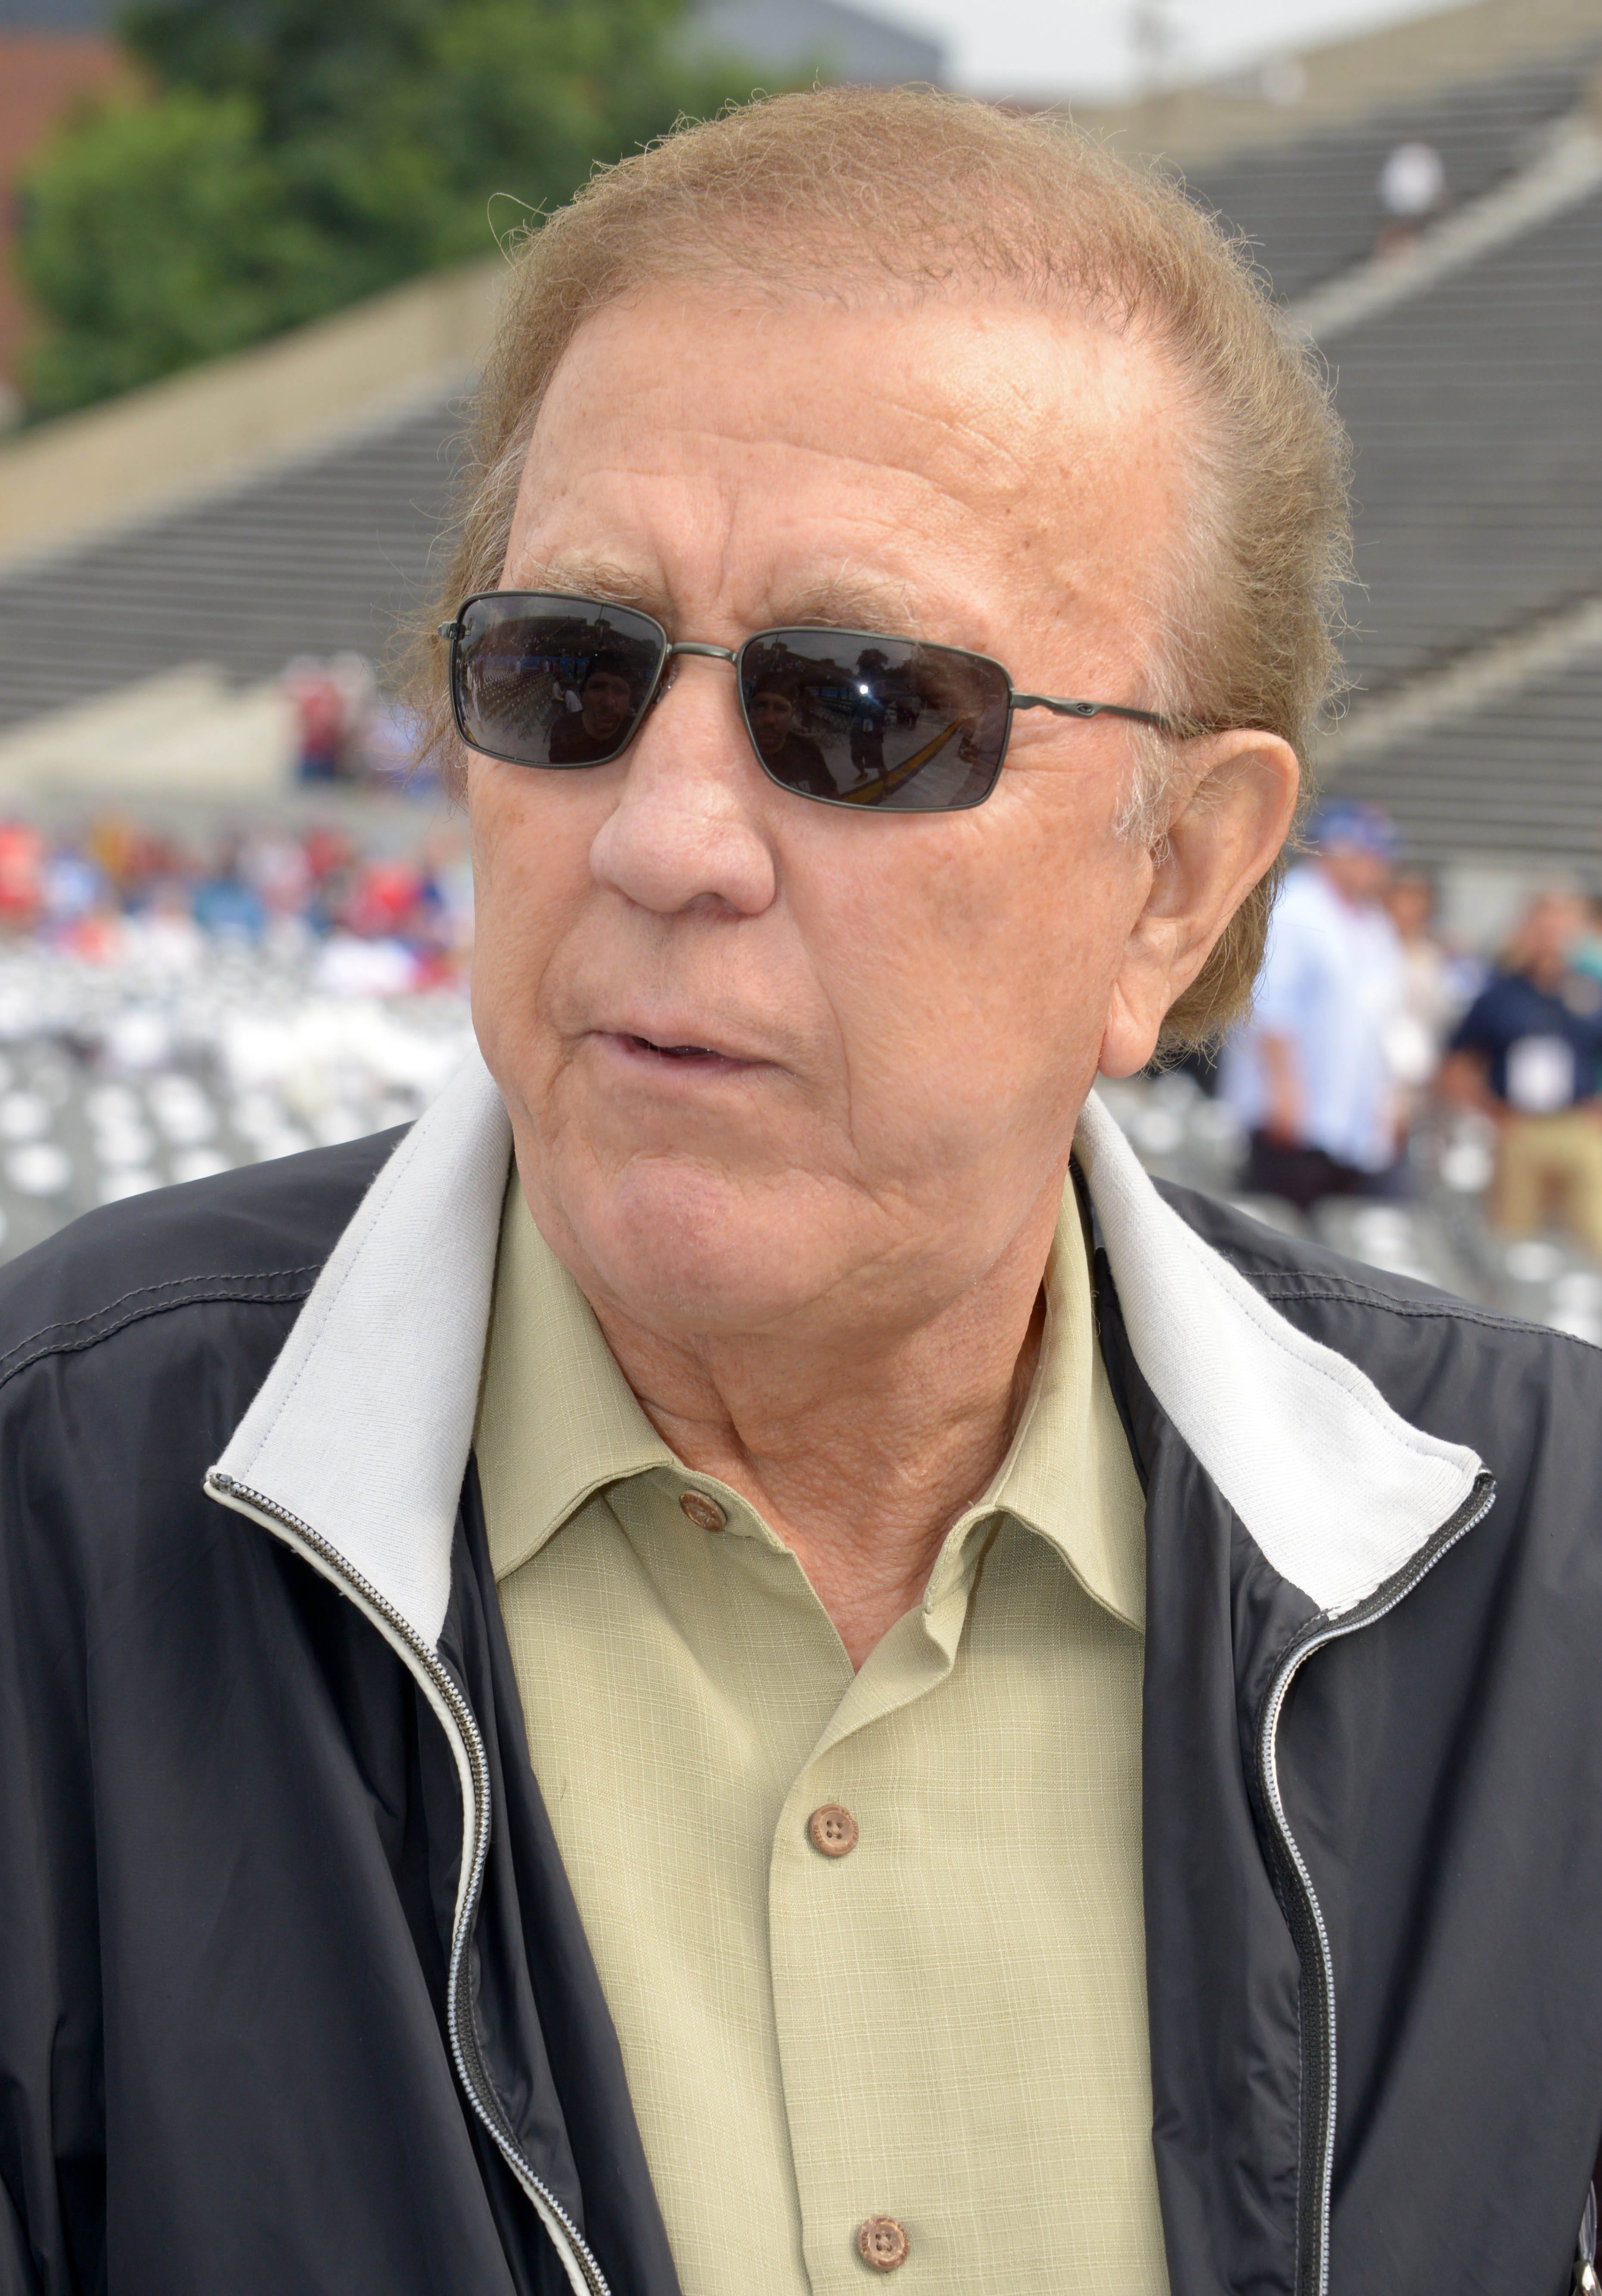 Tom Flores Pro Football Hall of Fame coach in Class of 2020